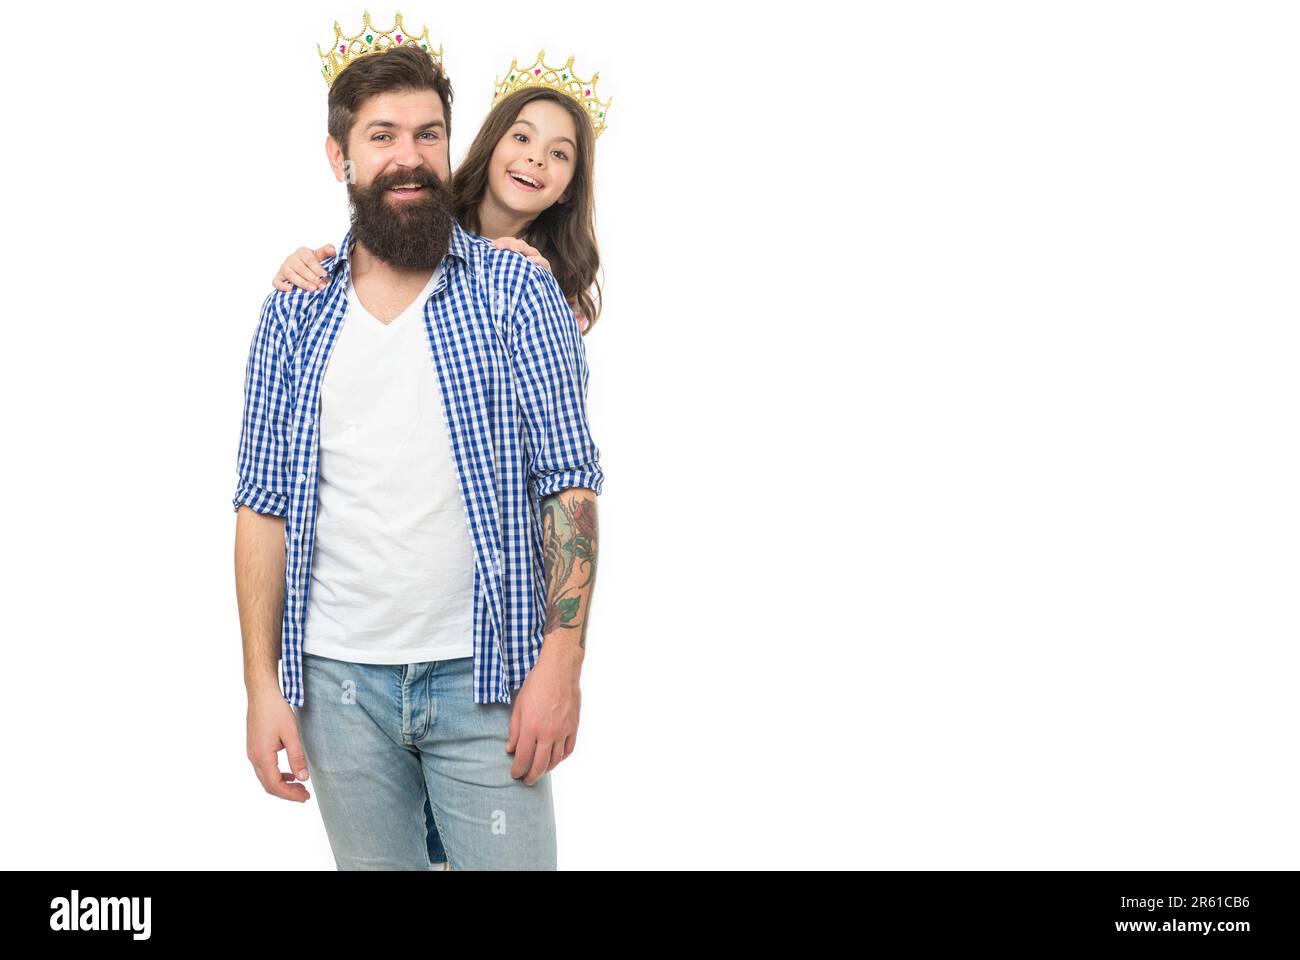 https://c8.alamy.com/comp/2R61CB6/king-and-princess-concept-bearded-hipster-and-little-daughter-family-heritage-crown-richness-and-monarchy-crown-symbol-of-royal-luxury-life-2R61CB6.jpg